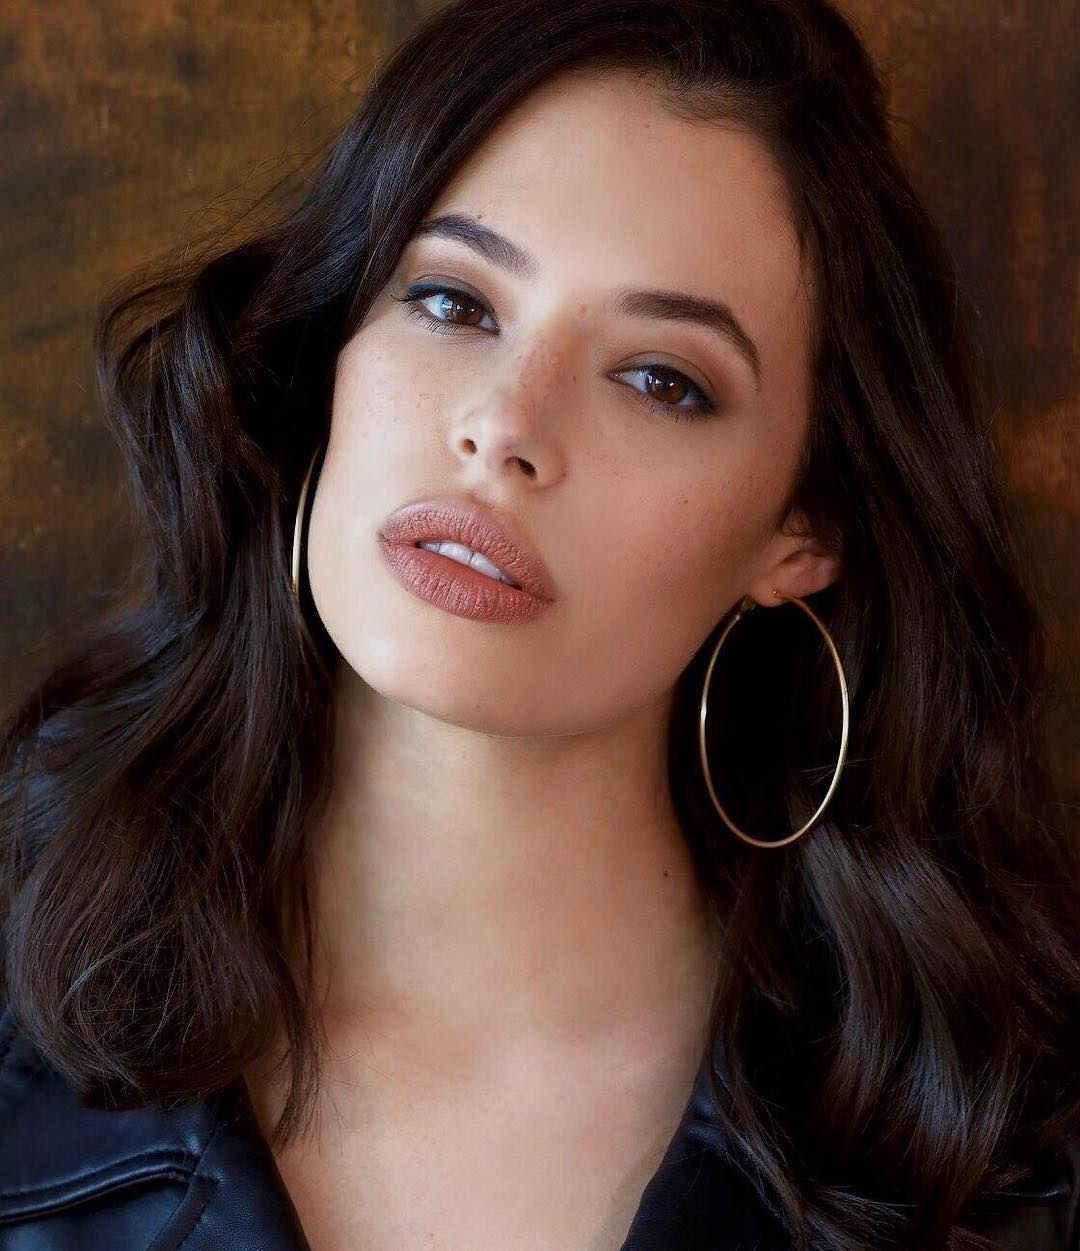 Chloe Bridges Biography (Age, Height, Weight, Husband, Family, Career & More)